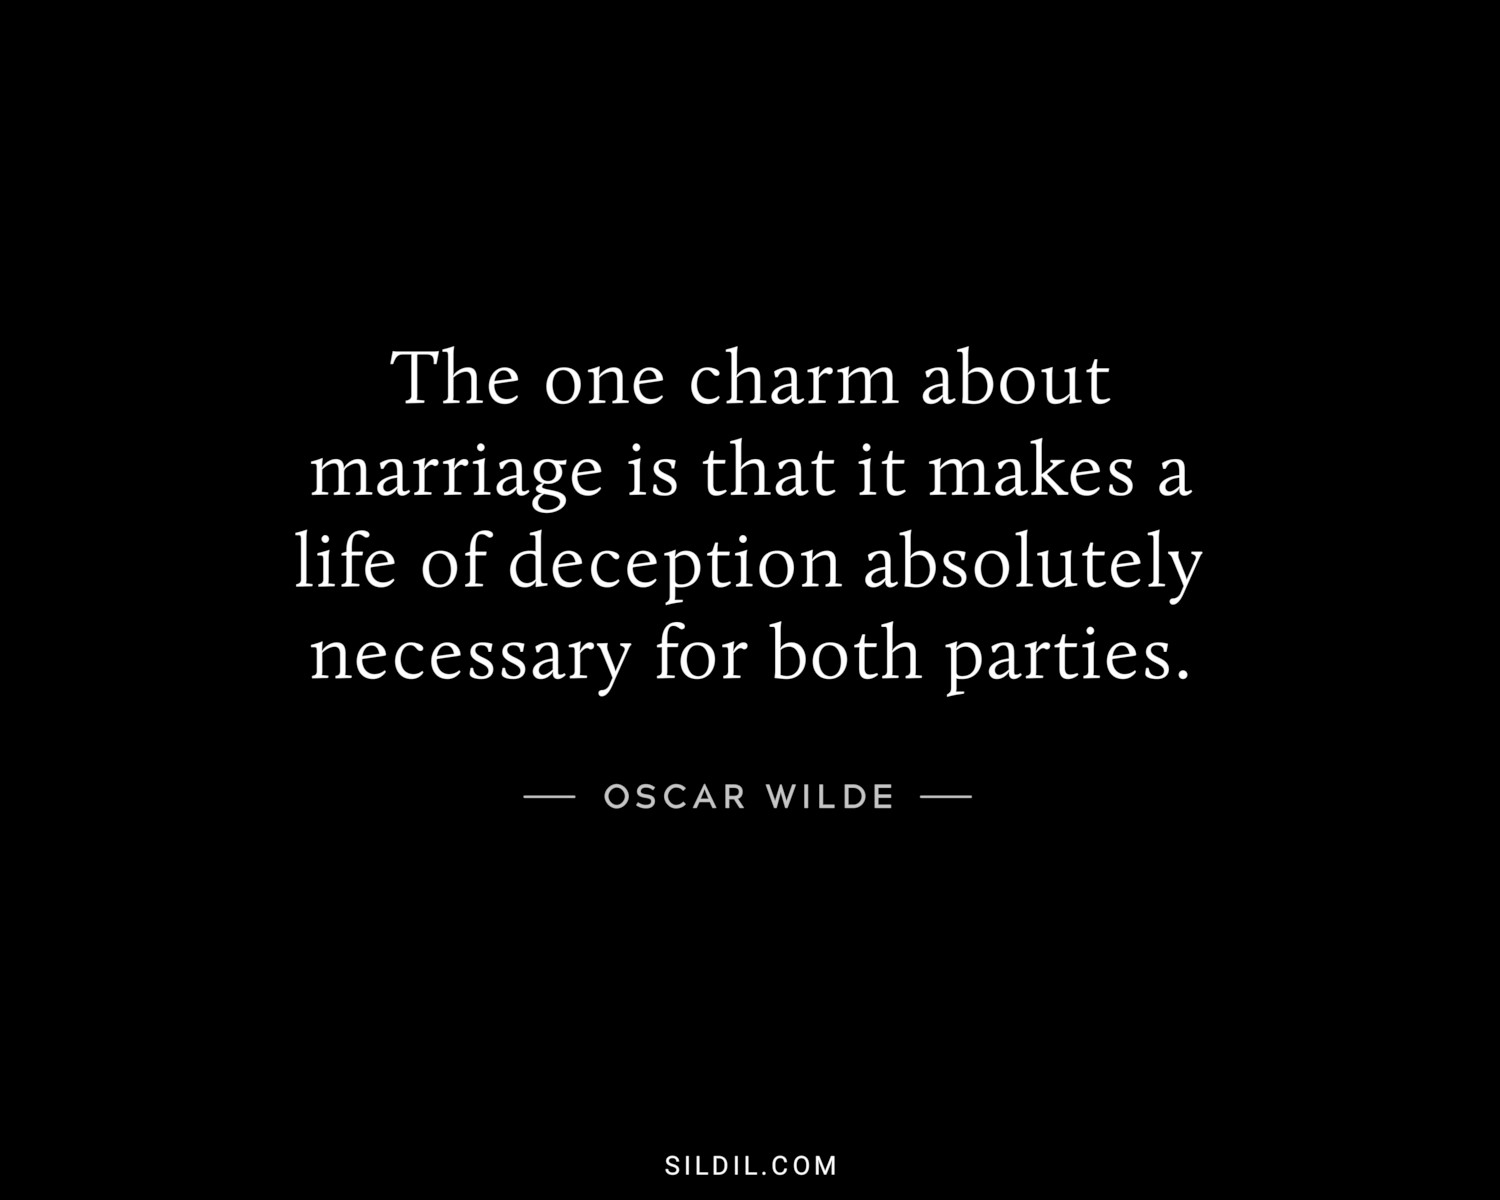 The one charm about marriage is that it makes a life of deception absolutely necessary for both parties.